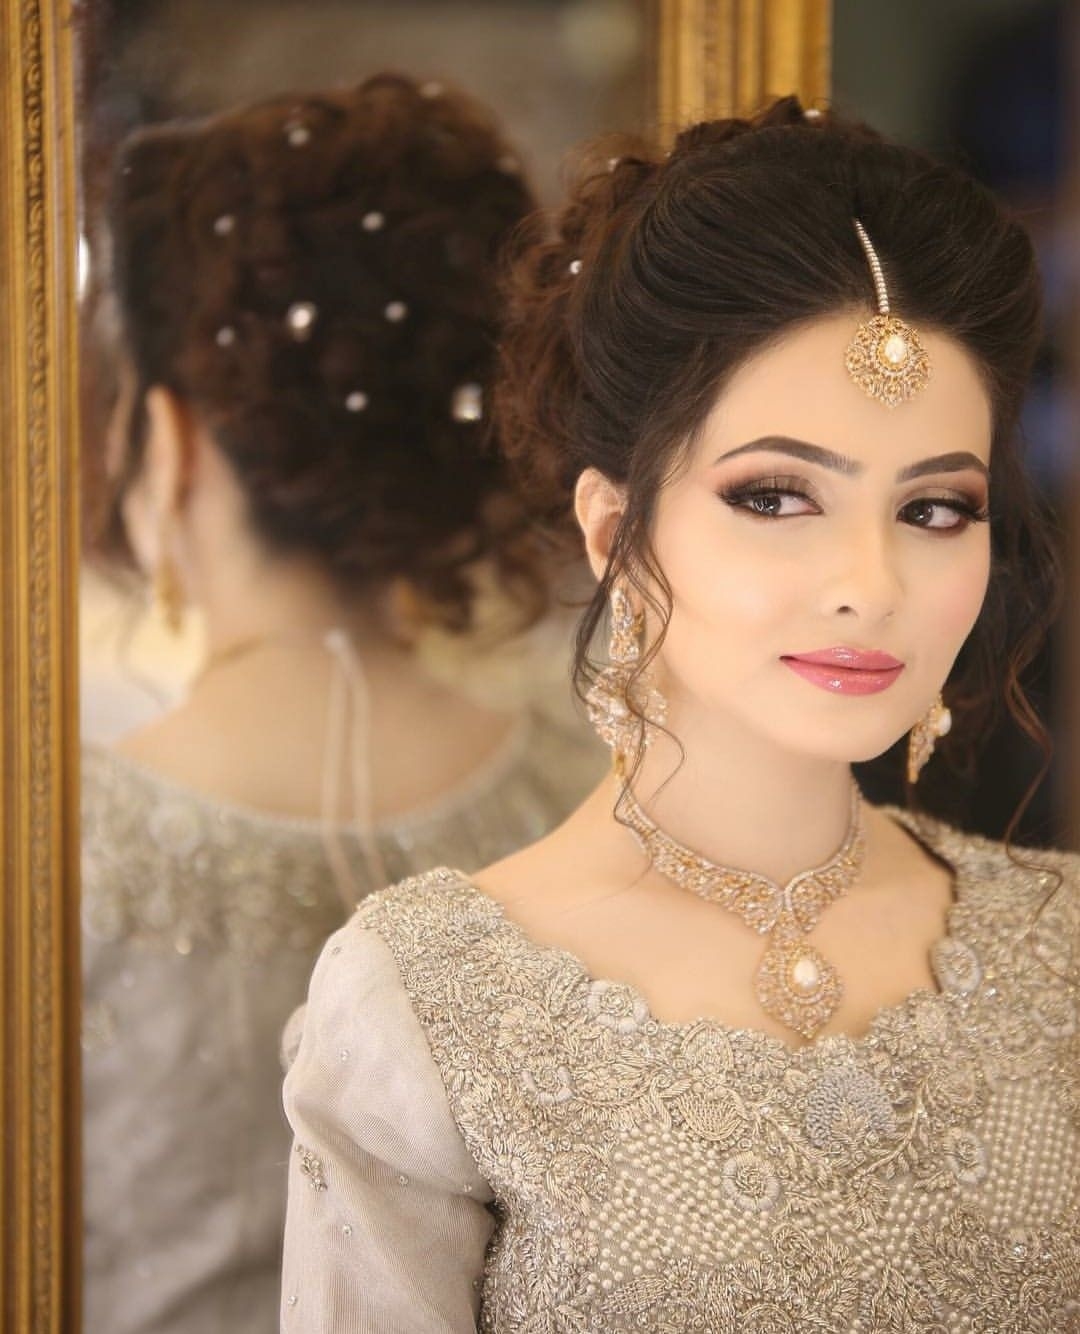 Afshii Majid | Pakistani Bridal Makeup, Bridal Hairstyle intended for Simple Indian Hairstyles For Weddings To Do Yourself